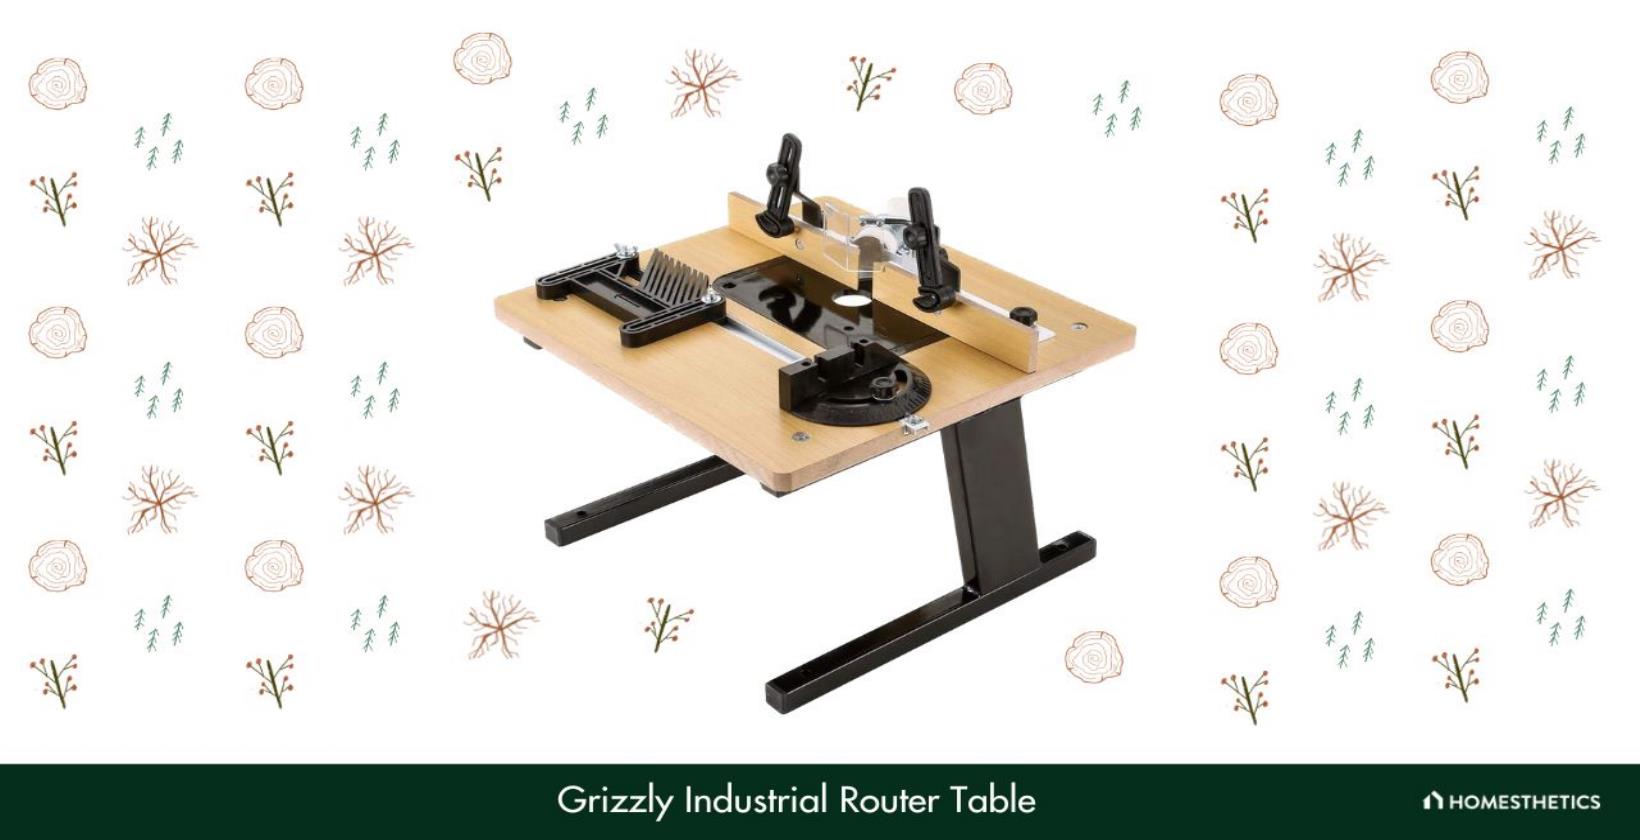 10. Grizzly Industrial Router Table